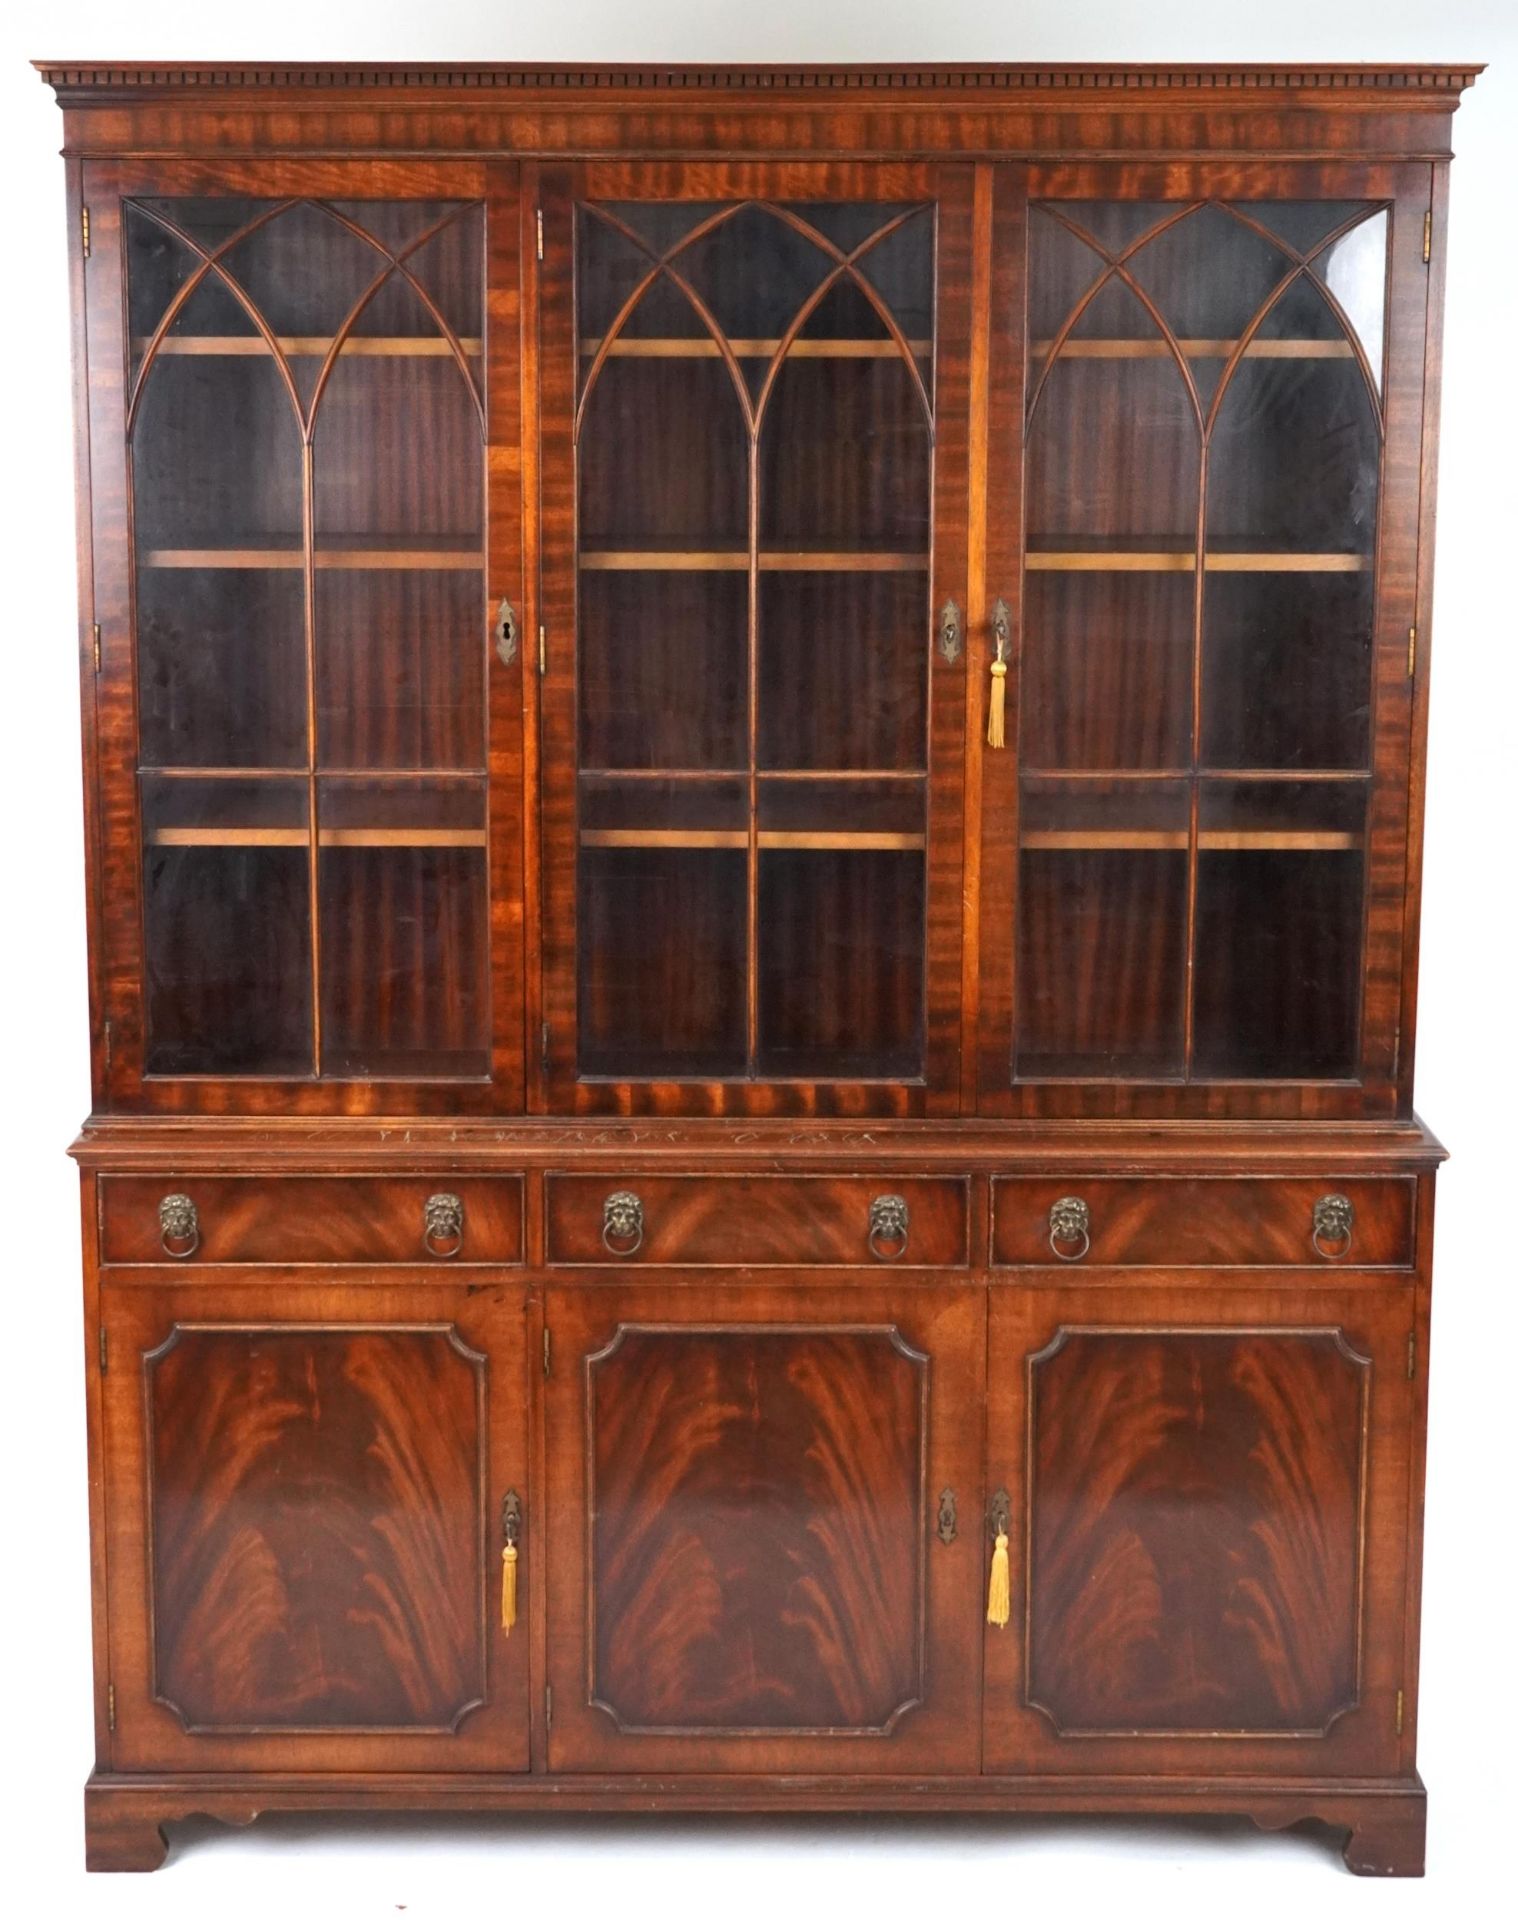 Georgian style mahogany library bookcase with lion mask handles, fitted with an arrangement of